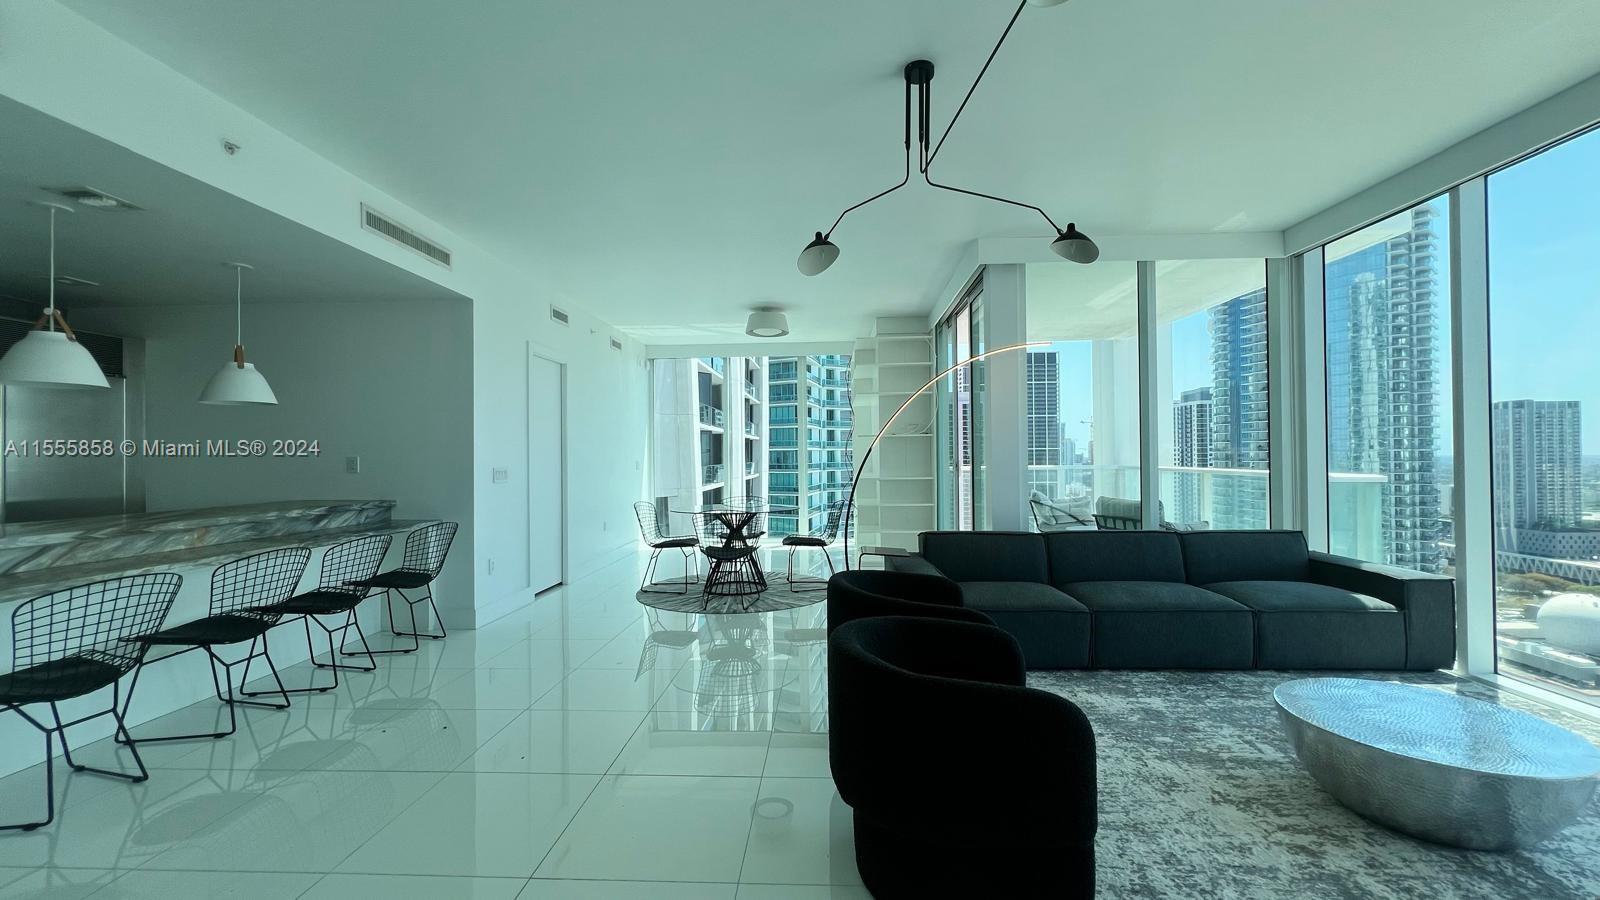 Amazing loft-style high floor 2 bedroom, 2 bathroom in Ten Museum Park, one of the most desirable luxury buildings in Downtown Miami.  Open concept layout allows for spacious living, kitchen, dining, entertainment or 2nd bedroom areas with stunning views from floor to ceiling windows. Brand new furniture, updated with marble countertop kitchen island, updated bathrooms, custom closets, built out bar/pantry with a wine beverage fridge, marble floors throughout, full size washer and dryer, two valet parking spots. This building offers high end resort style amenities including multiple poos, state-of-the art fitness center, luxurious spa, Beach club service, full front desk concierge, 24hr security and valet. Centrally located to all Miami has to offer. You will love living here.